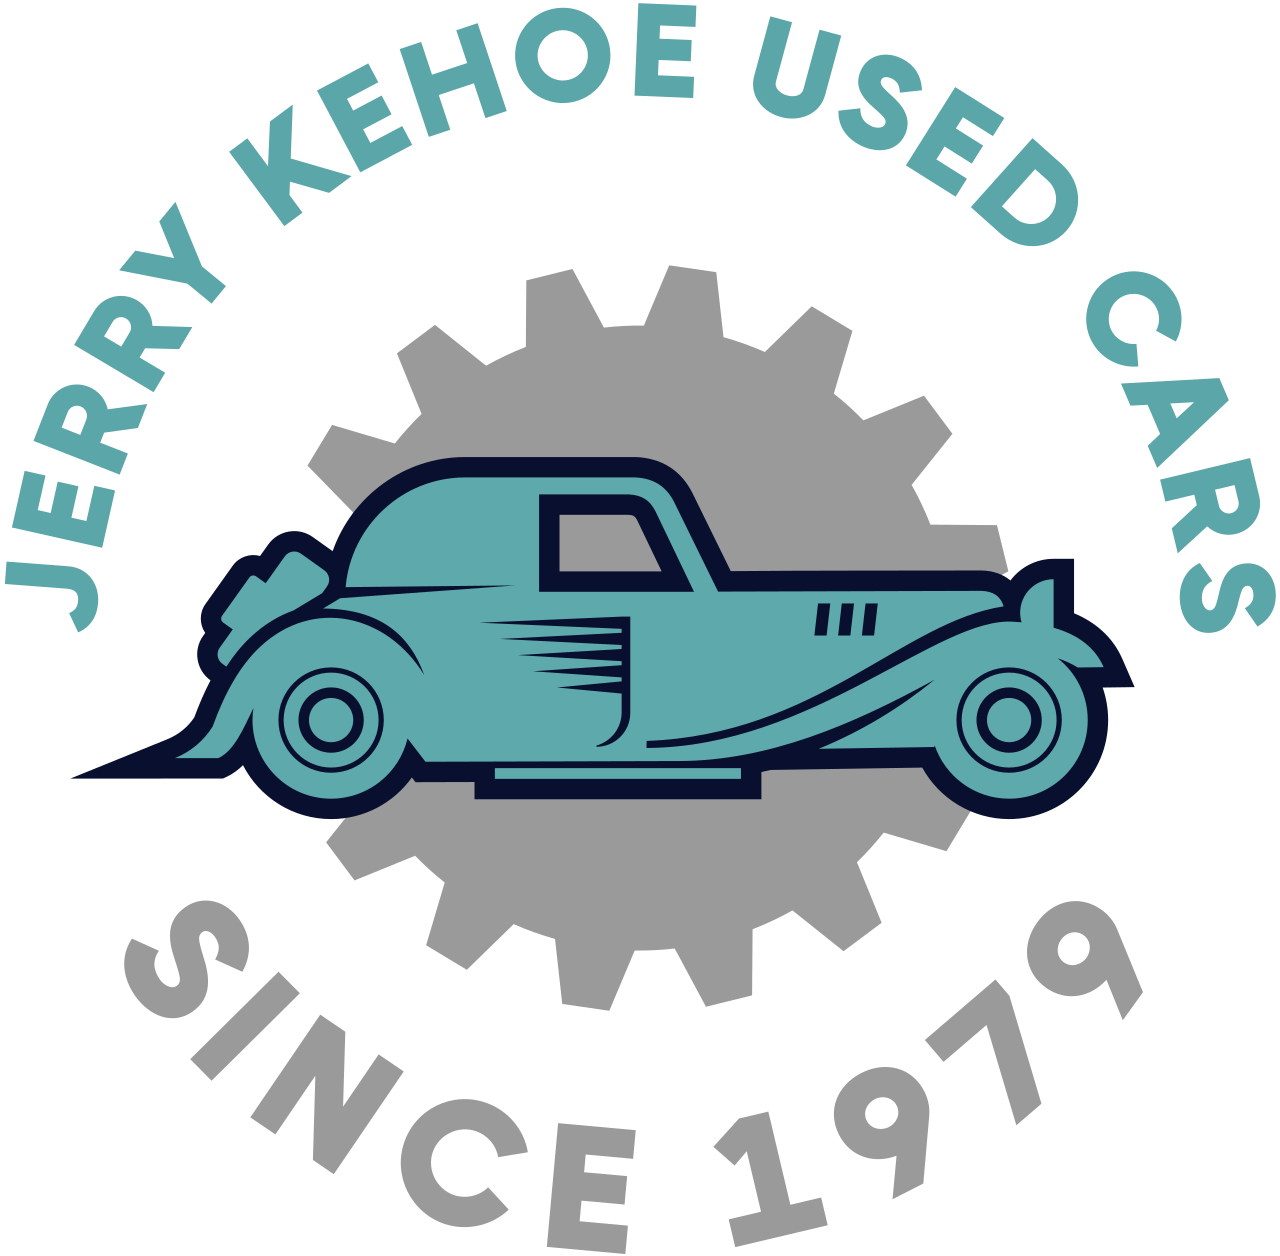 Jerry Kehoe Used Cars's web page